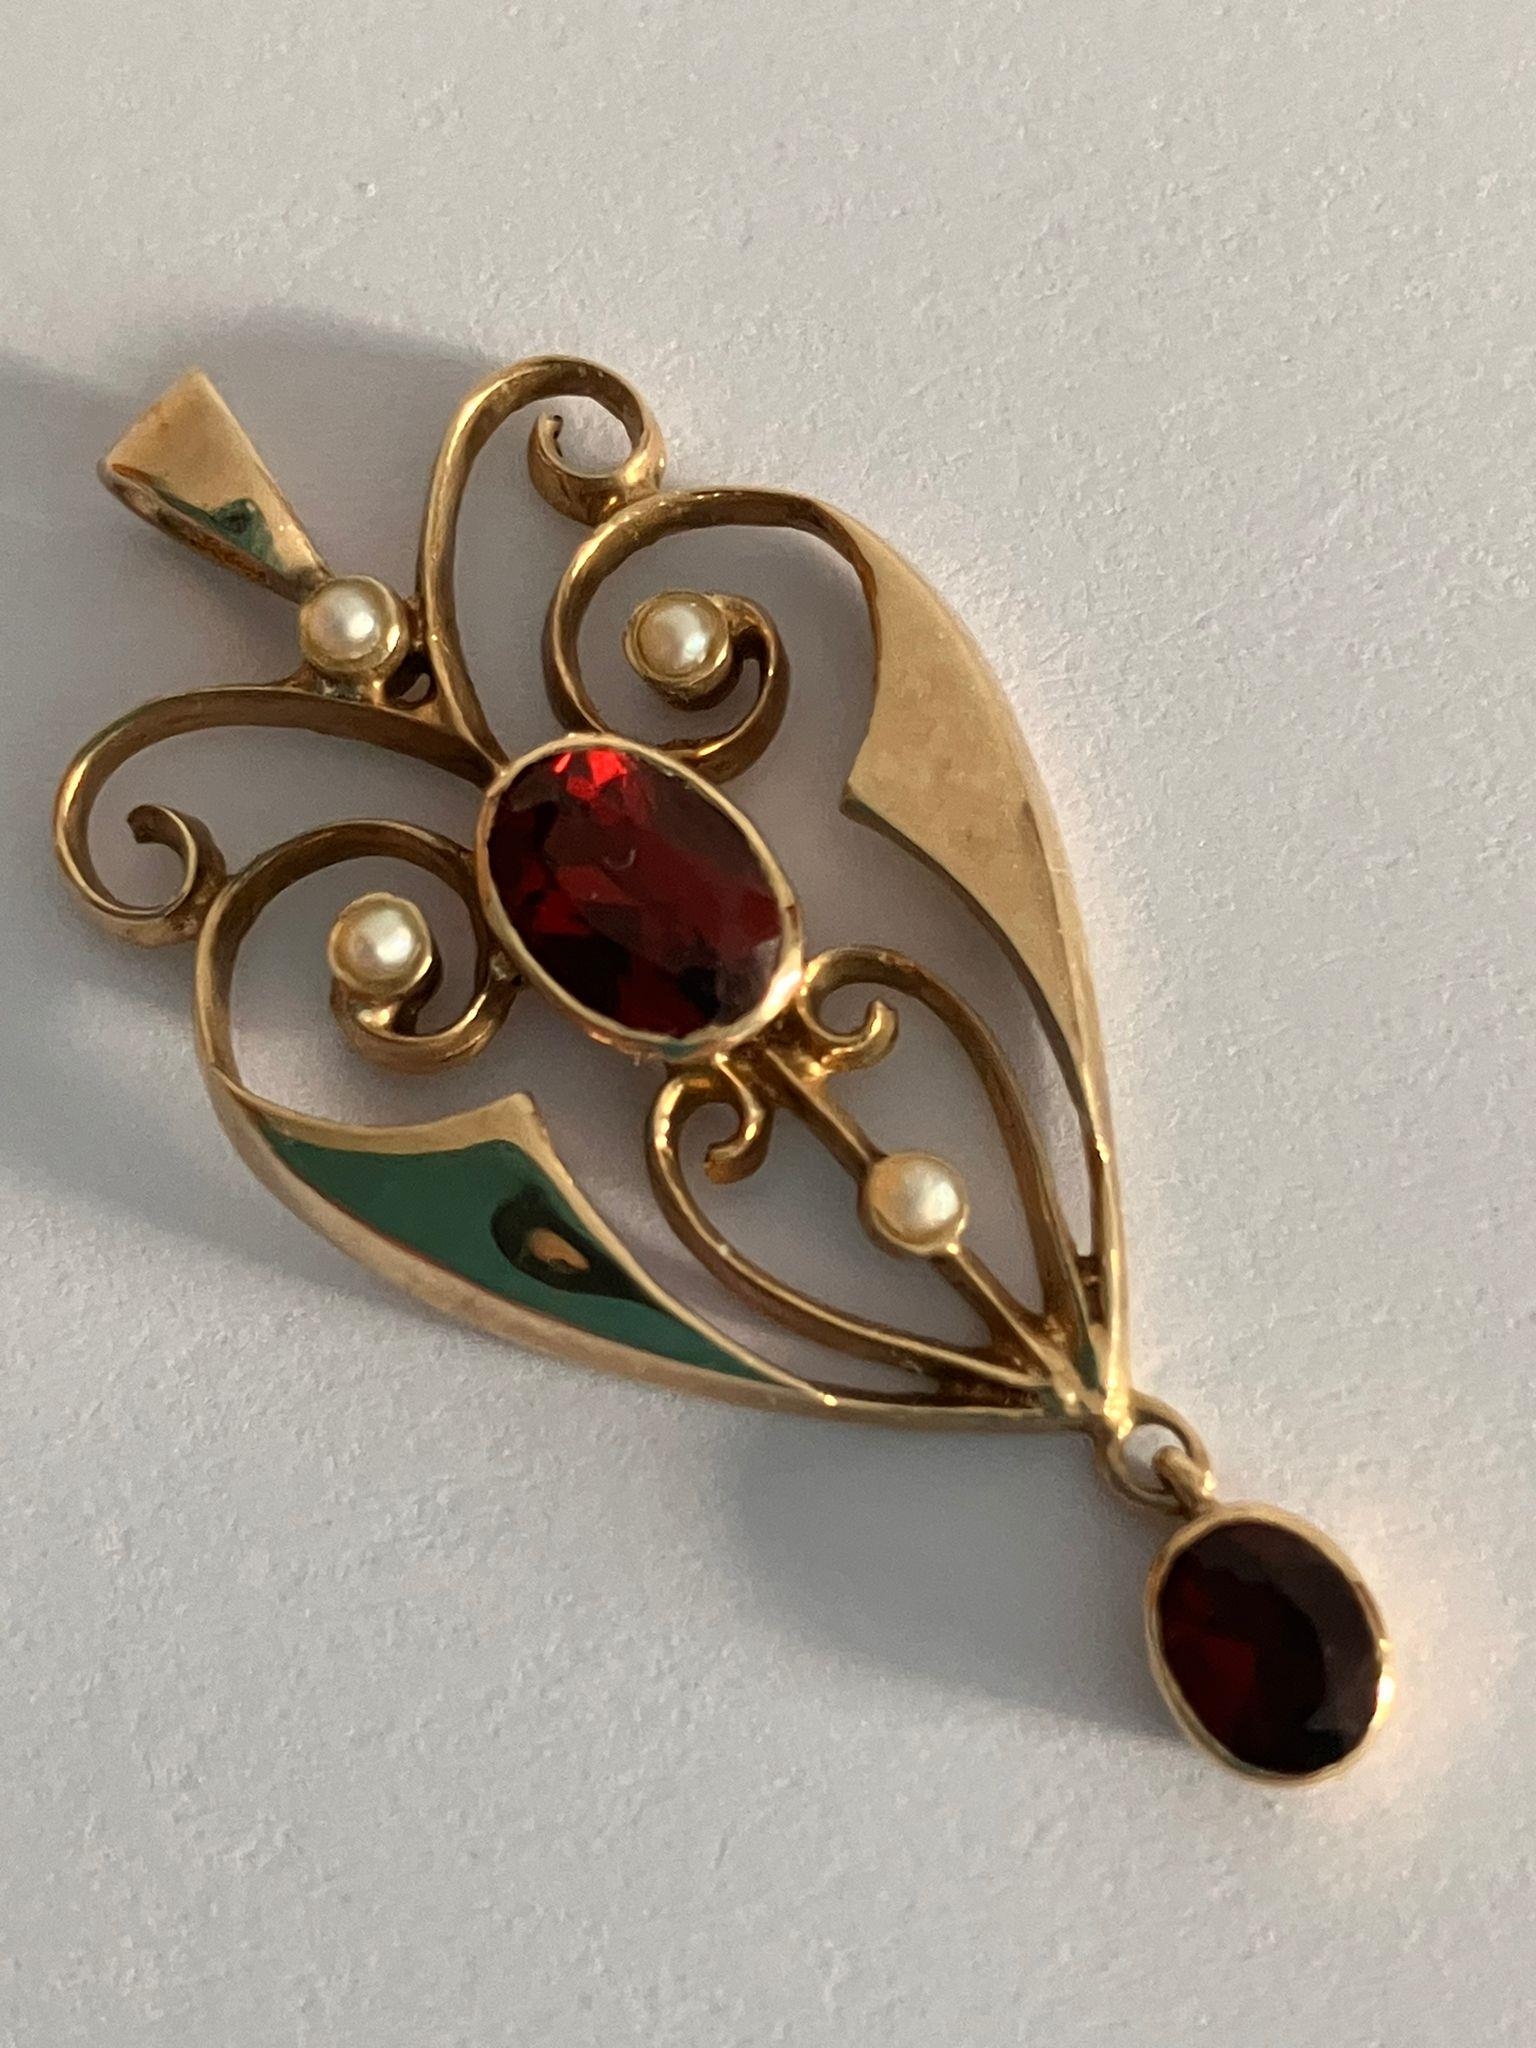 Vintage 9 carat GOLD EDWARDIAN STYLE PENDANT. Set with GARNETS and SEED PEARLS. 3.1 grams. 3.75 cm